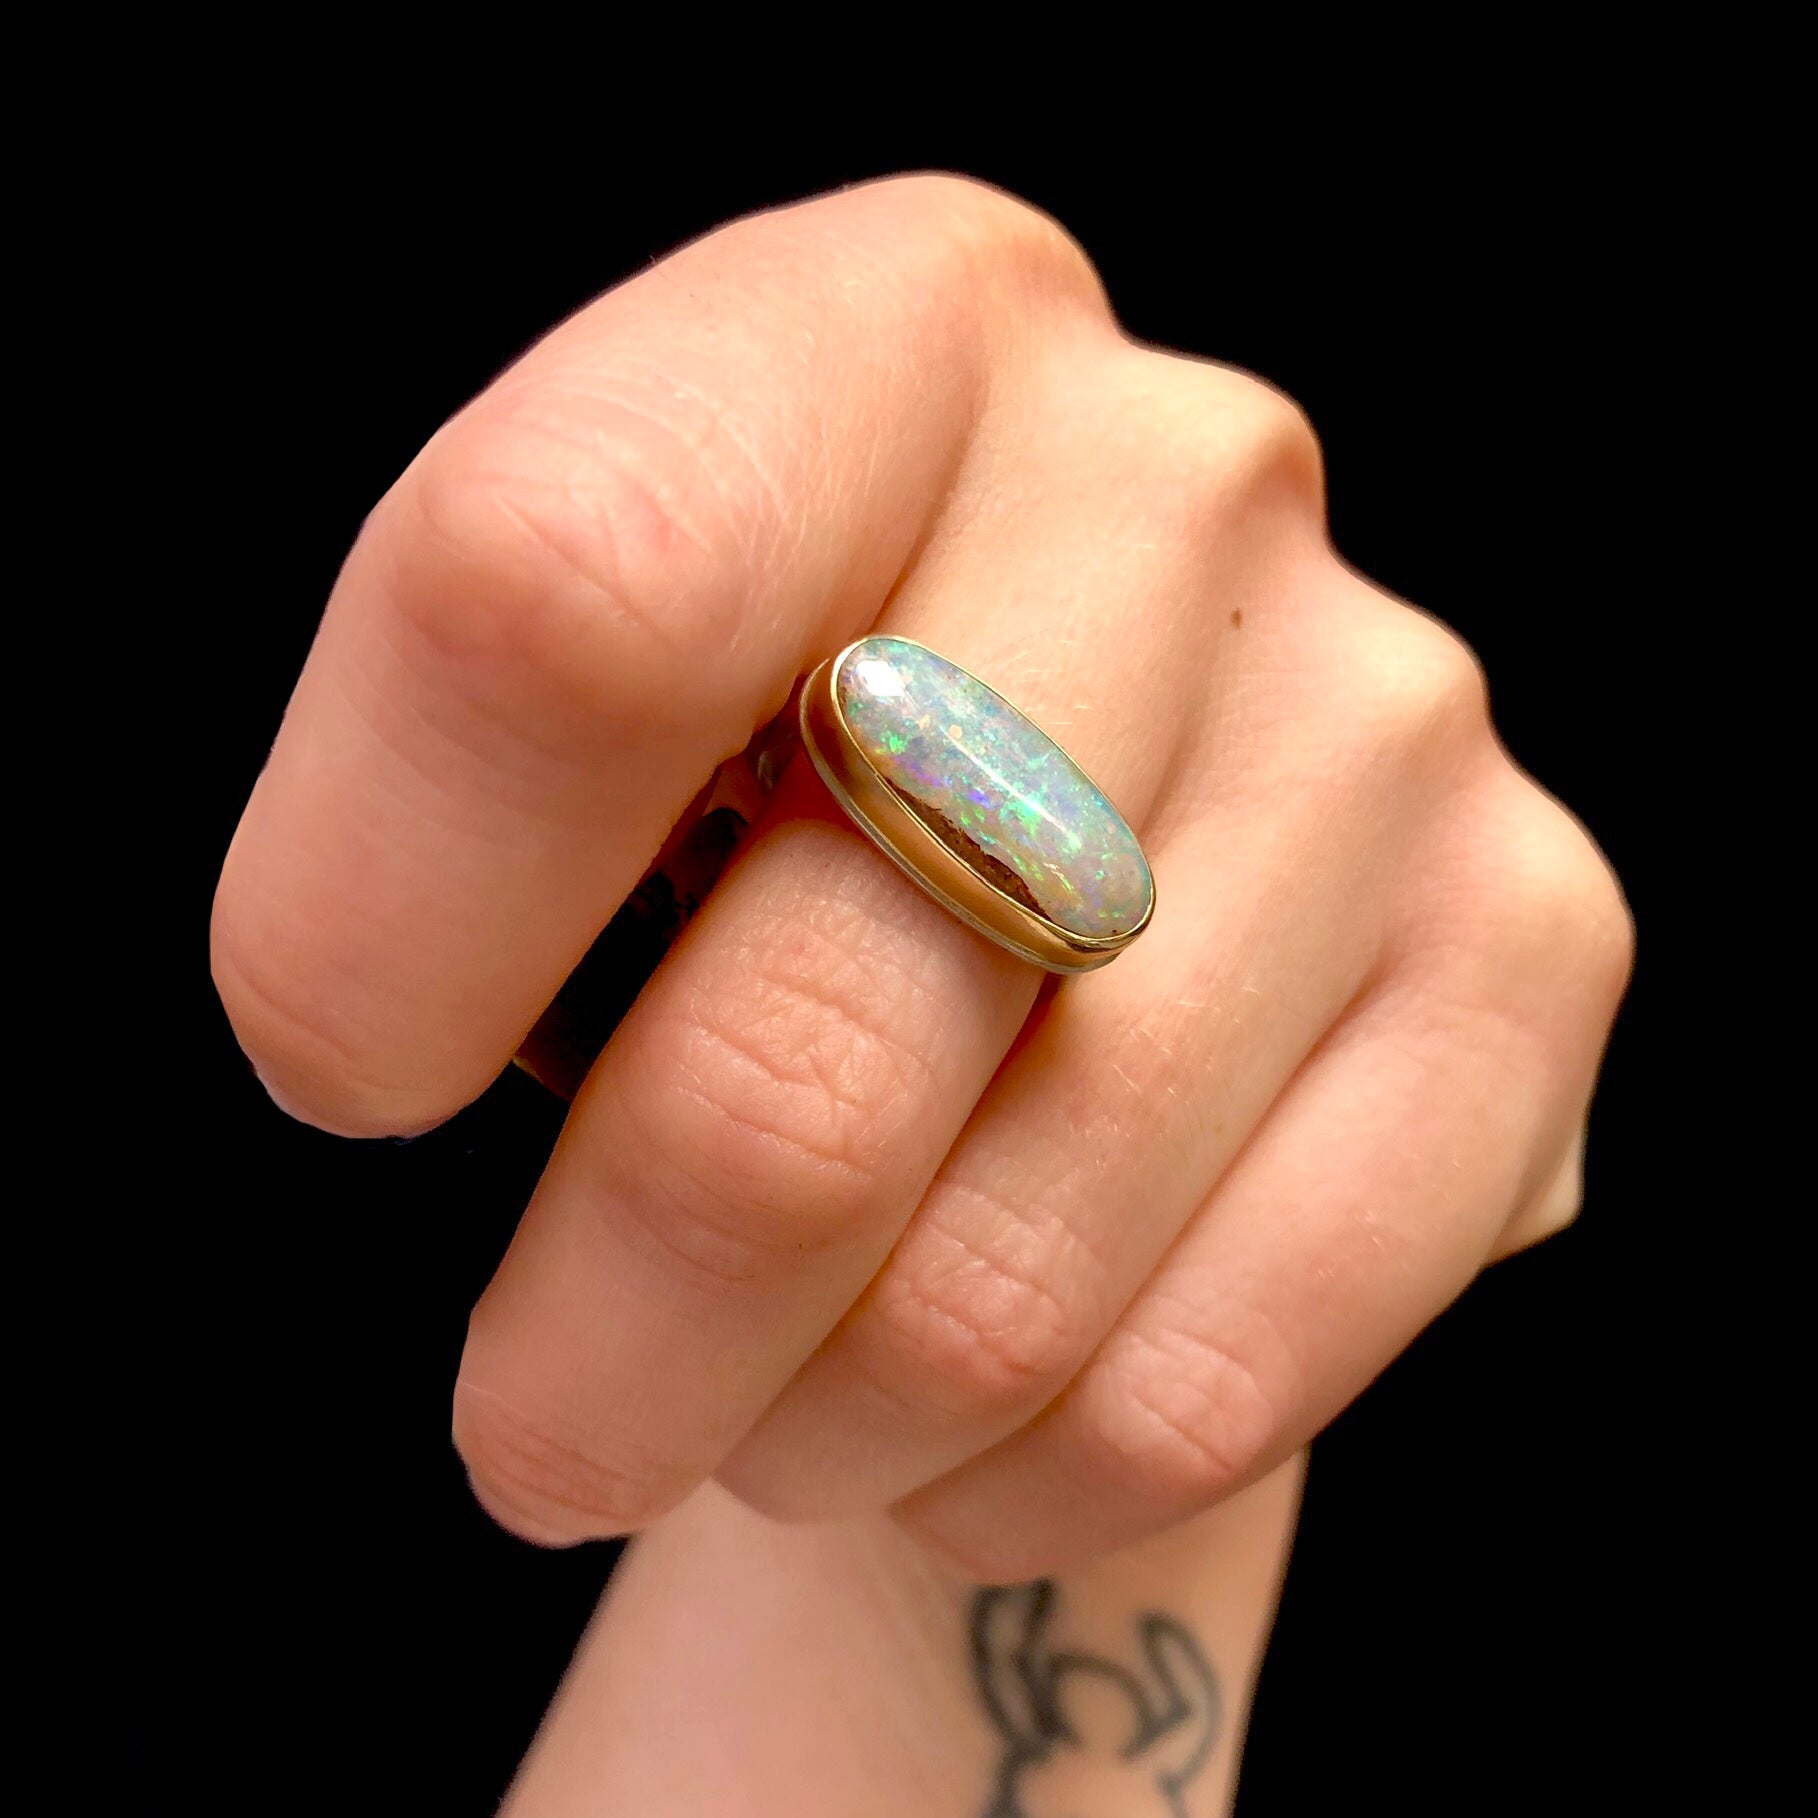 Smooth surface of Fossilized Opalized Wood Ring reflecting light on stone shown on hand